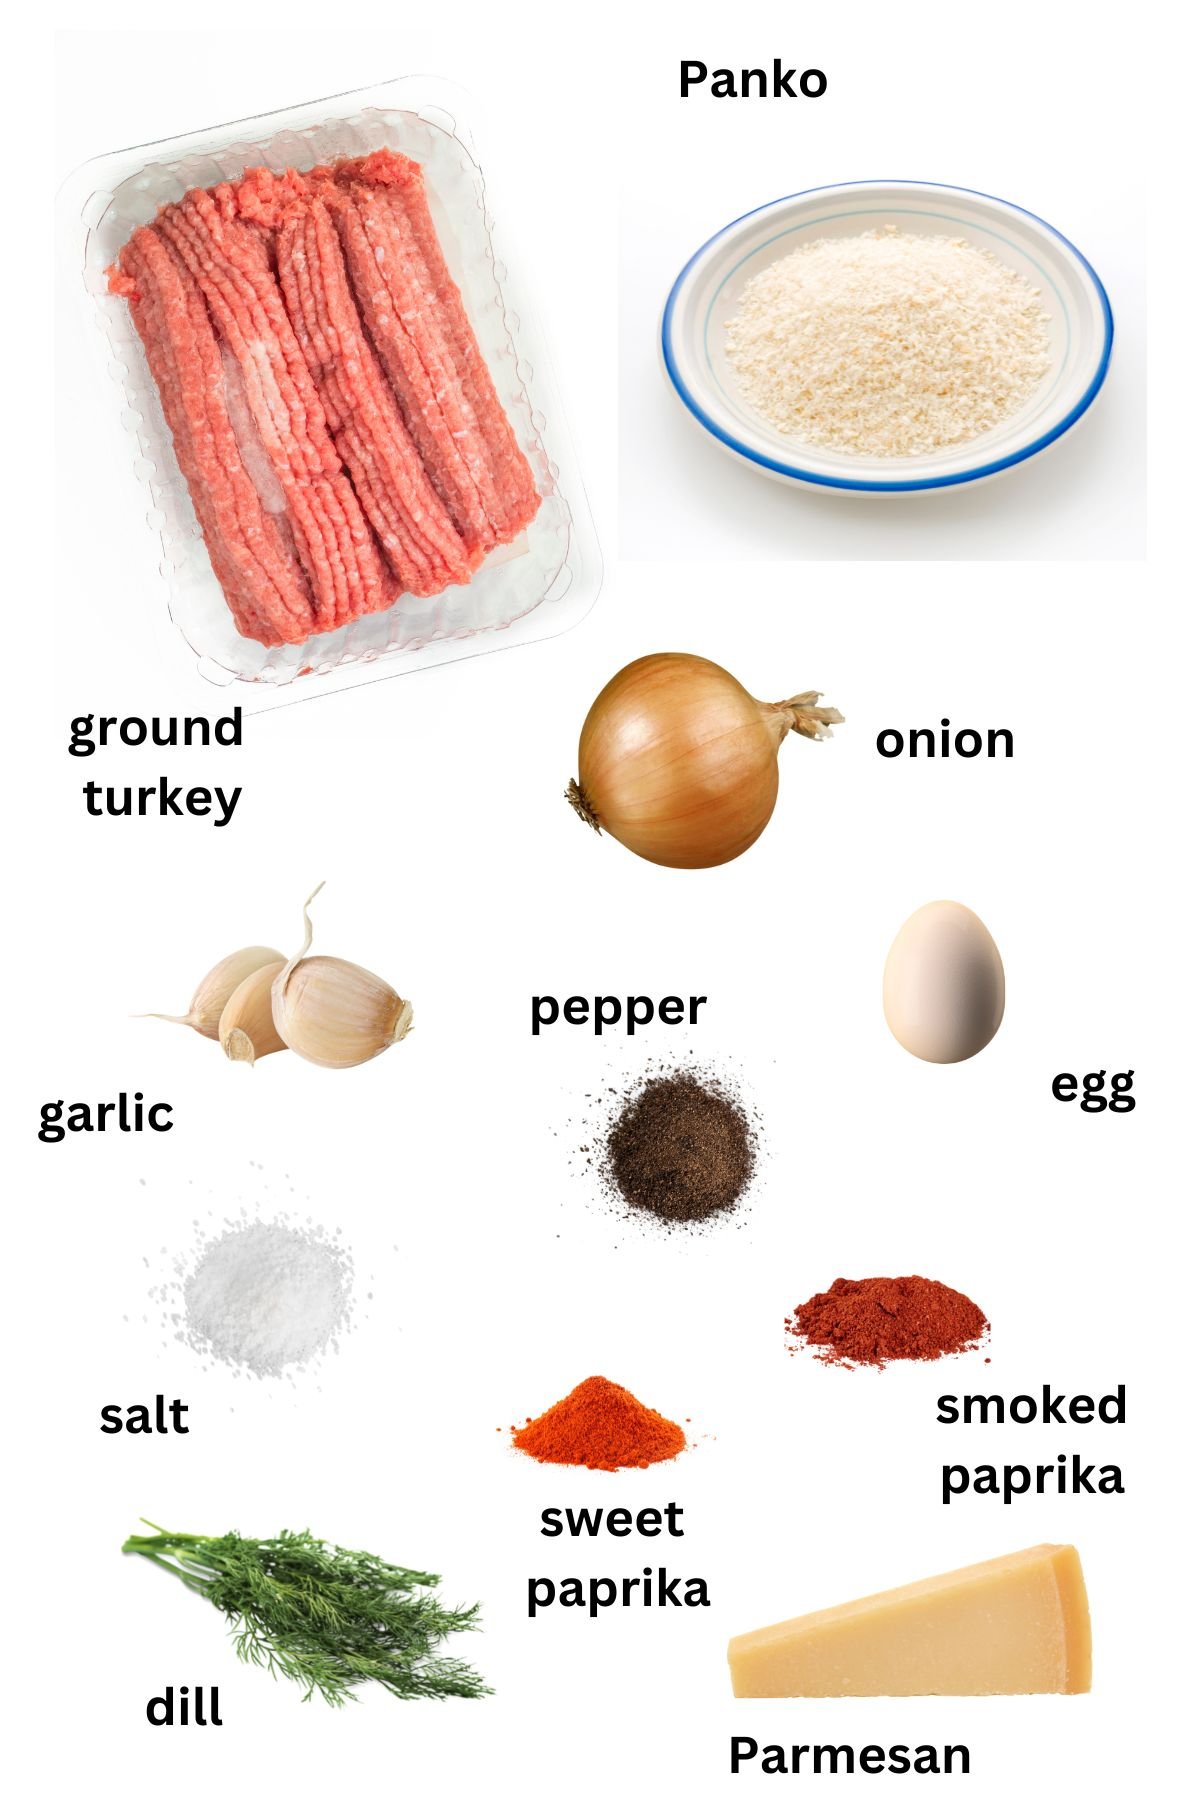 listed ingredients for making meatballs with ground turkey meat.